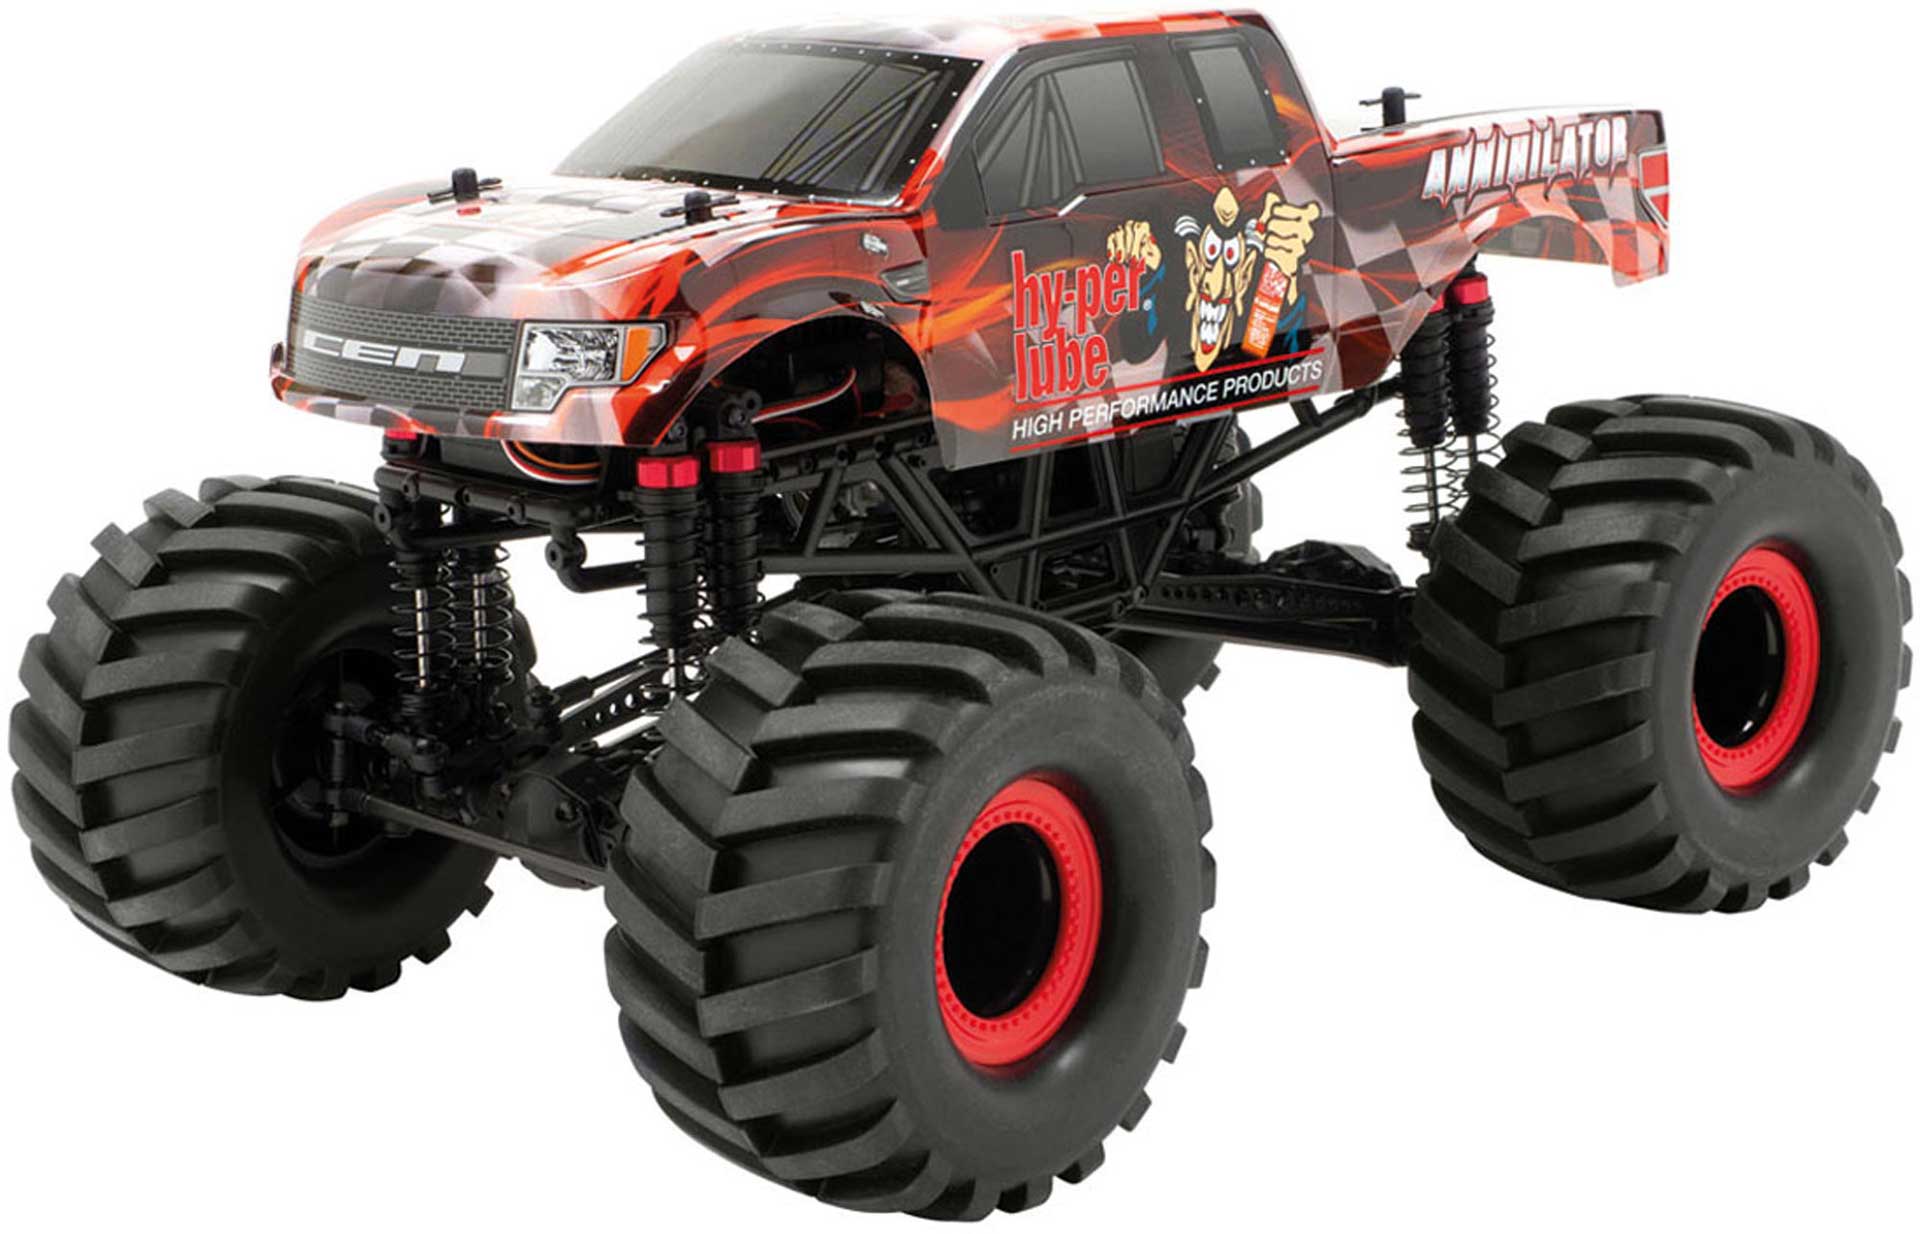 CEN HL150 MONSTER TRUCK 4WD SOLID AXLE 1/10 RTR EP